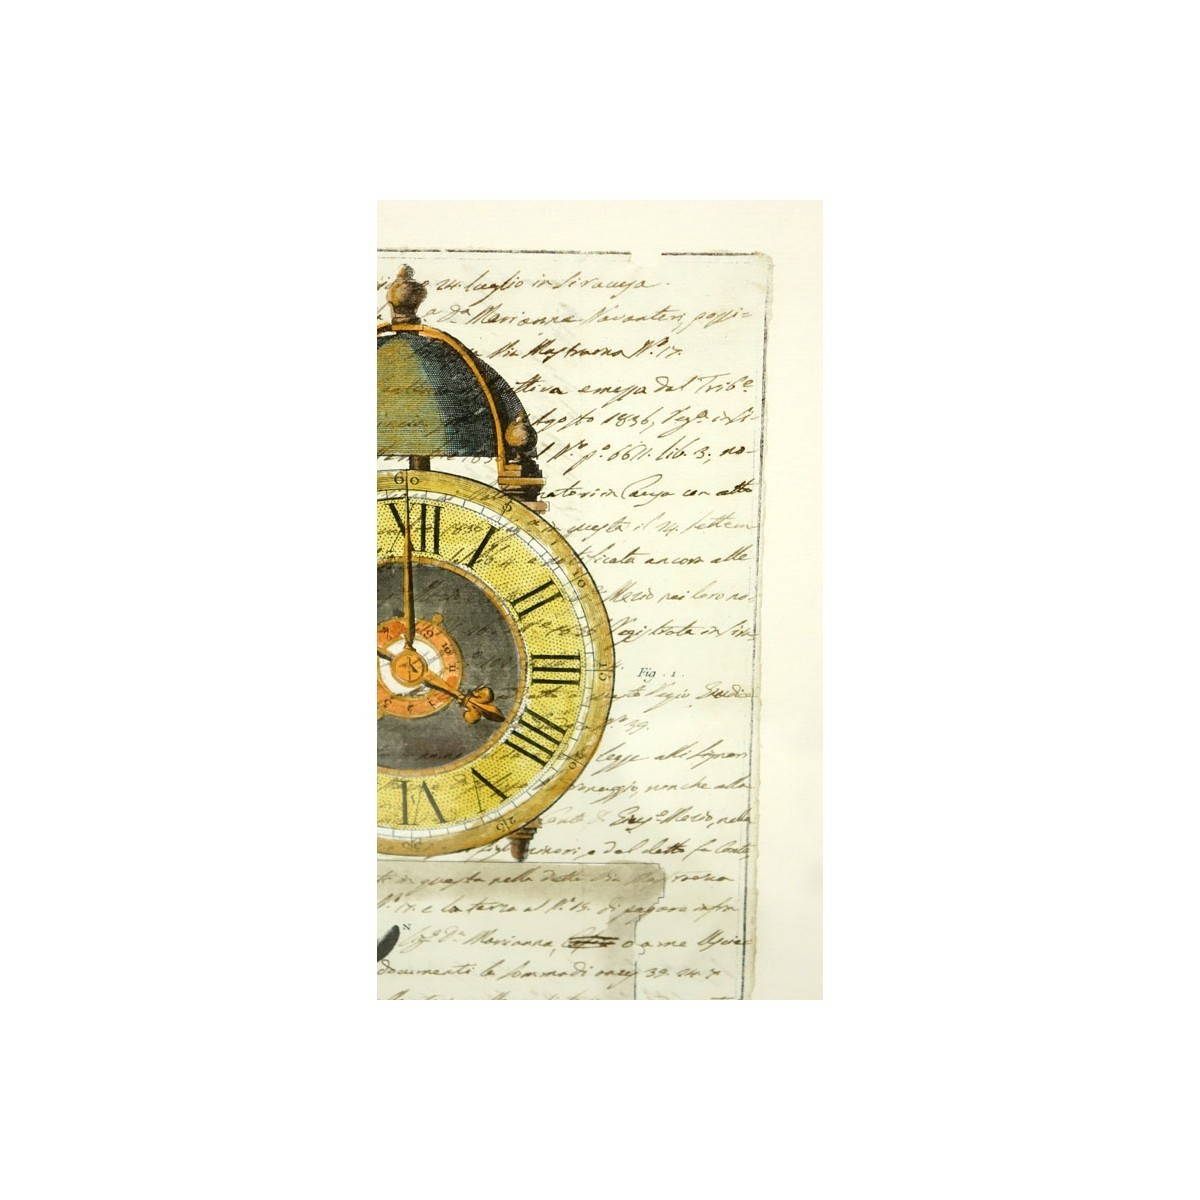 19th Century (1836) Document with Clockworks